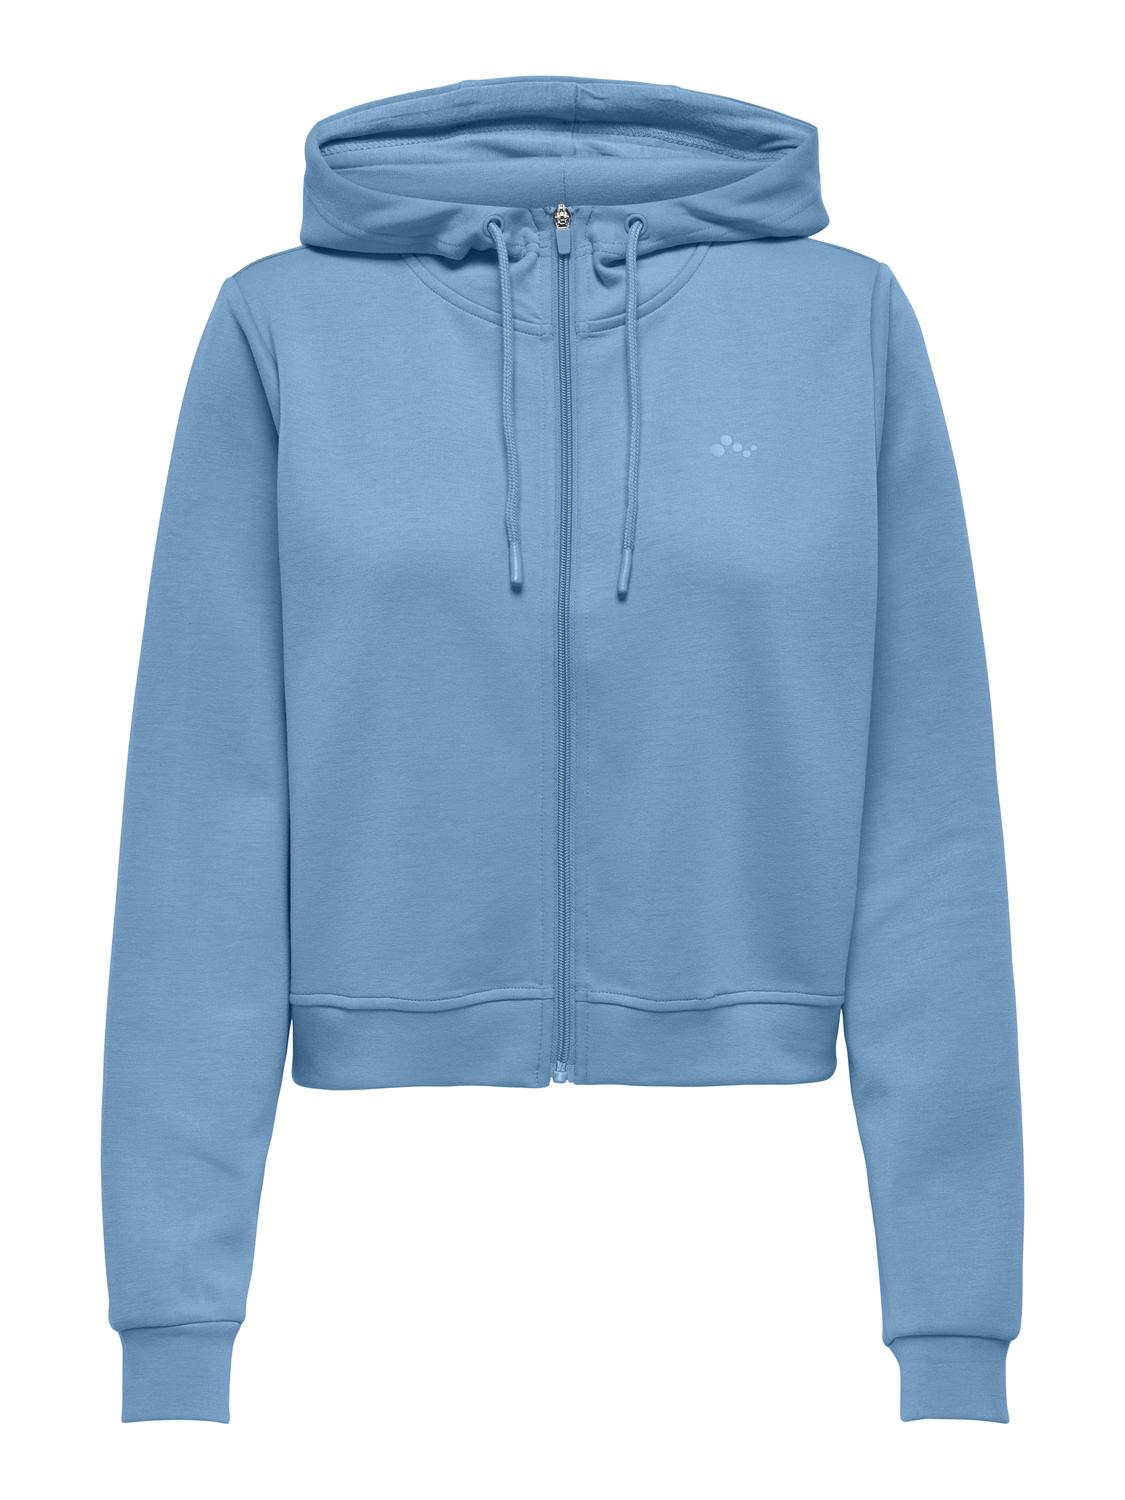 ONLY Cropped hoodie -Blissful Blue - 15283439